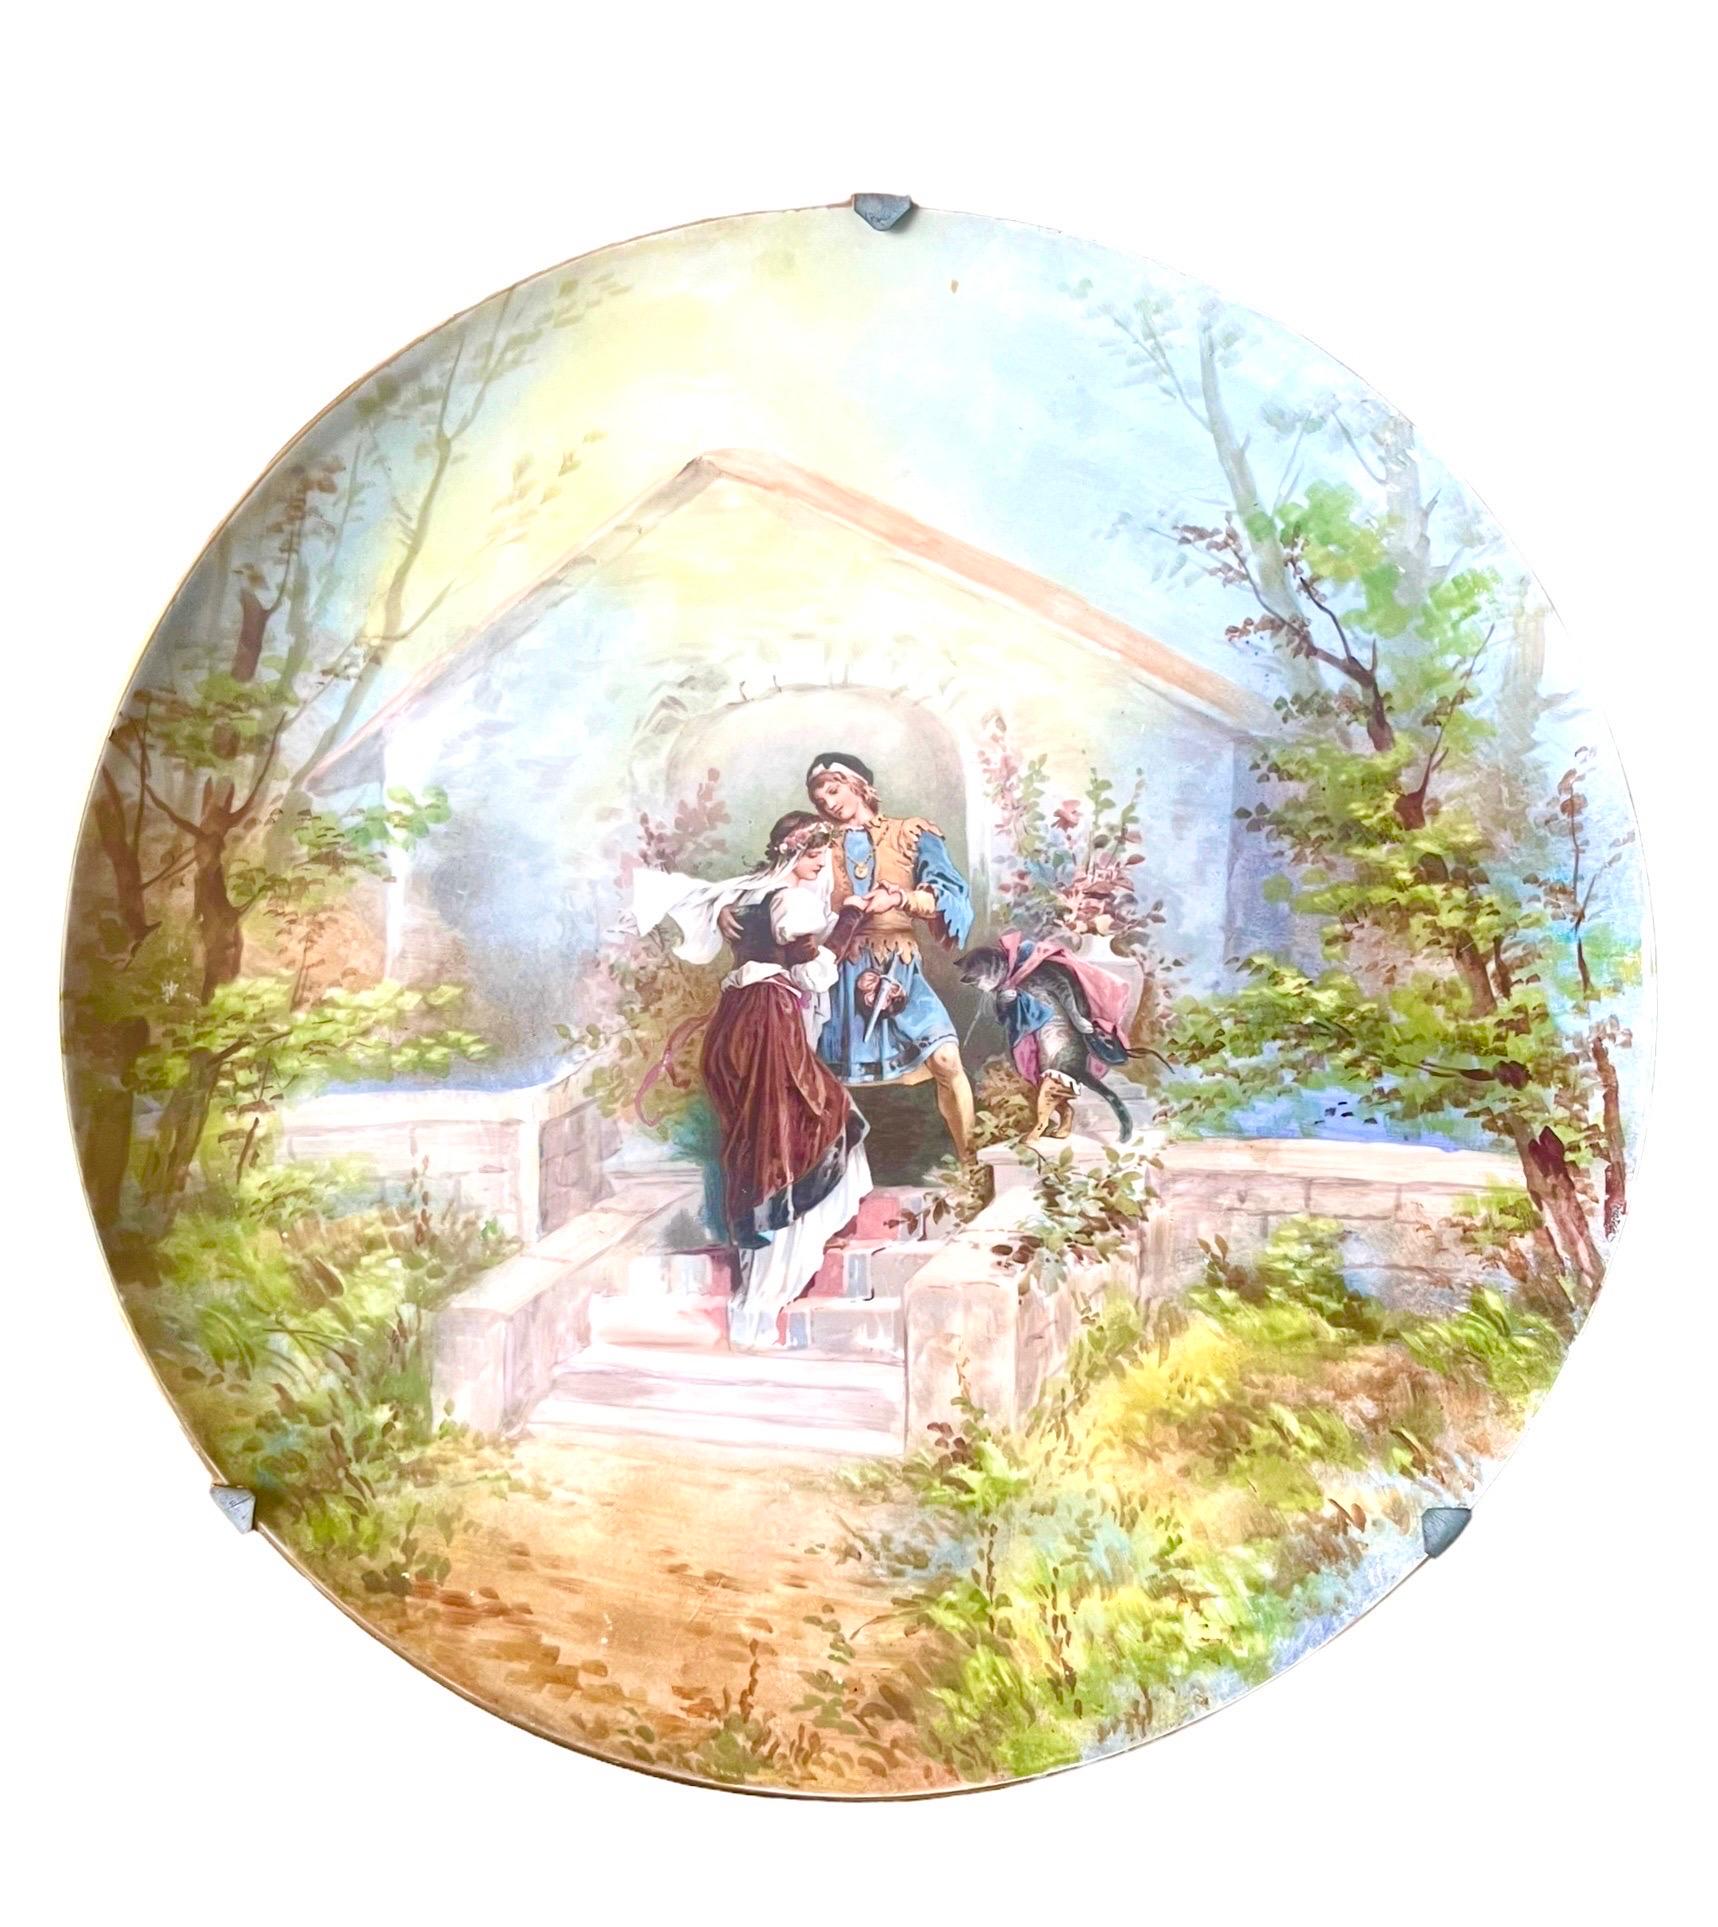 Very beautiful large plate, decorative dish in good quality porcelain with polychrome painted decoration of a final scene from Charles Perrault's famous tale Puss in Boots, written at the end of the 17th century.
The colors are bright and the scene